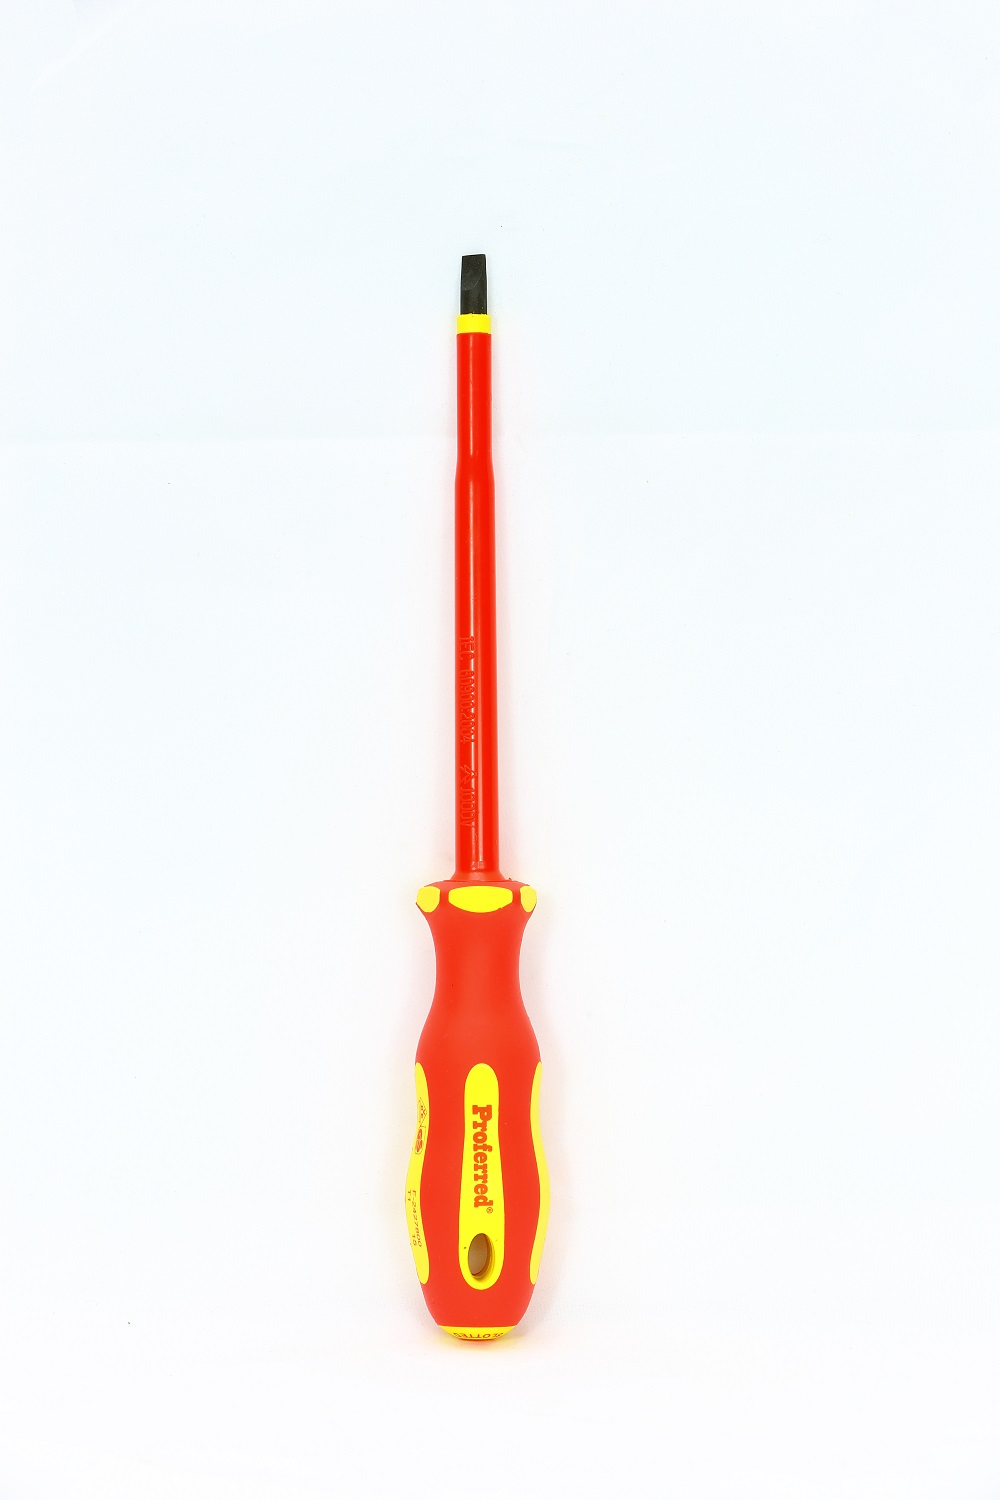 PROFERRED INSULATED SCREWDRIVER SLOTTED ( 1000V) 1/4'' X 6''